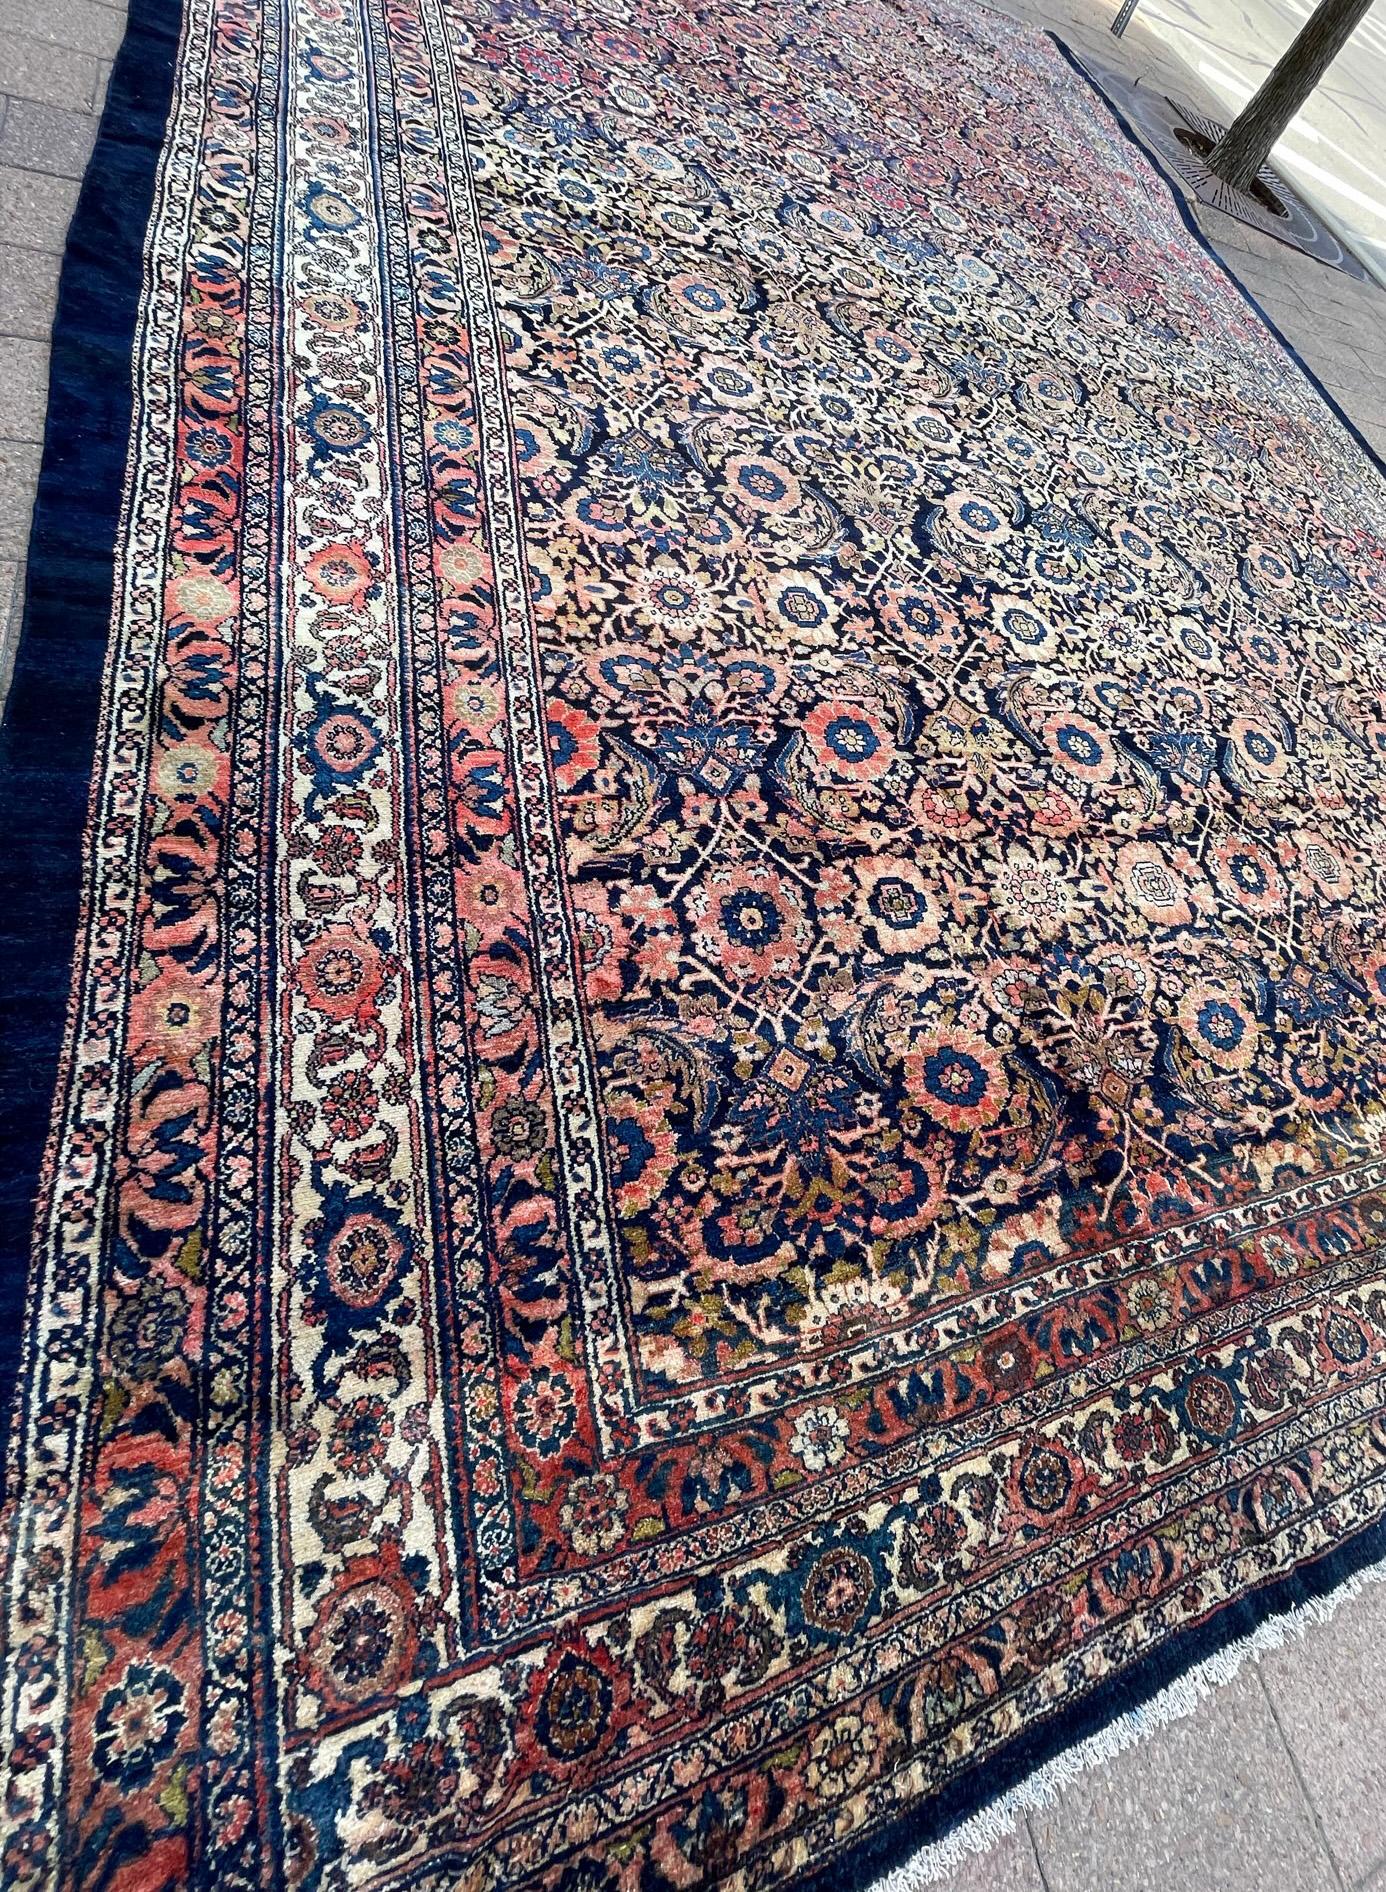 Antique Oversize Persian Malayer Carpet In Good Condition For Sale In Evanston, IL